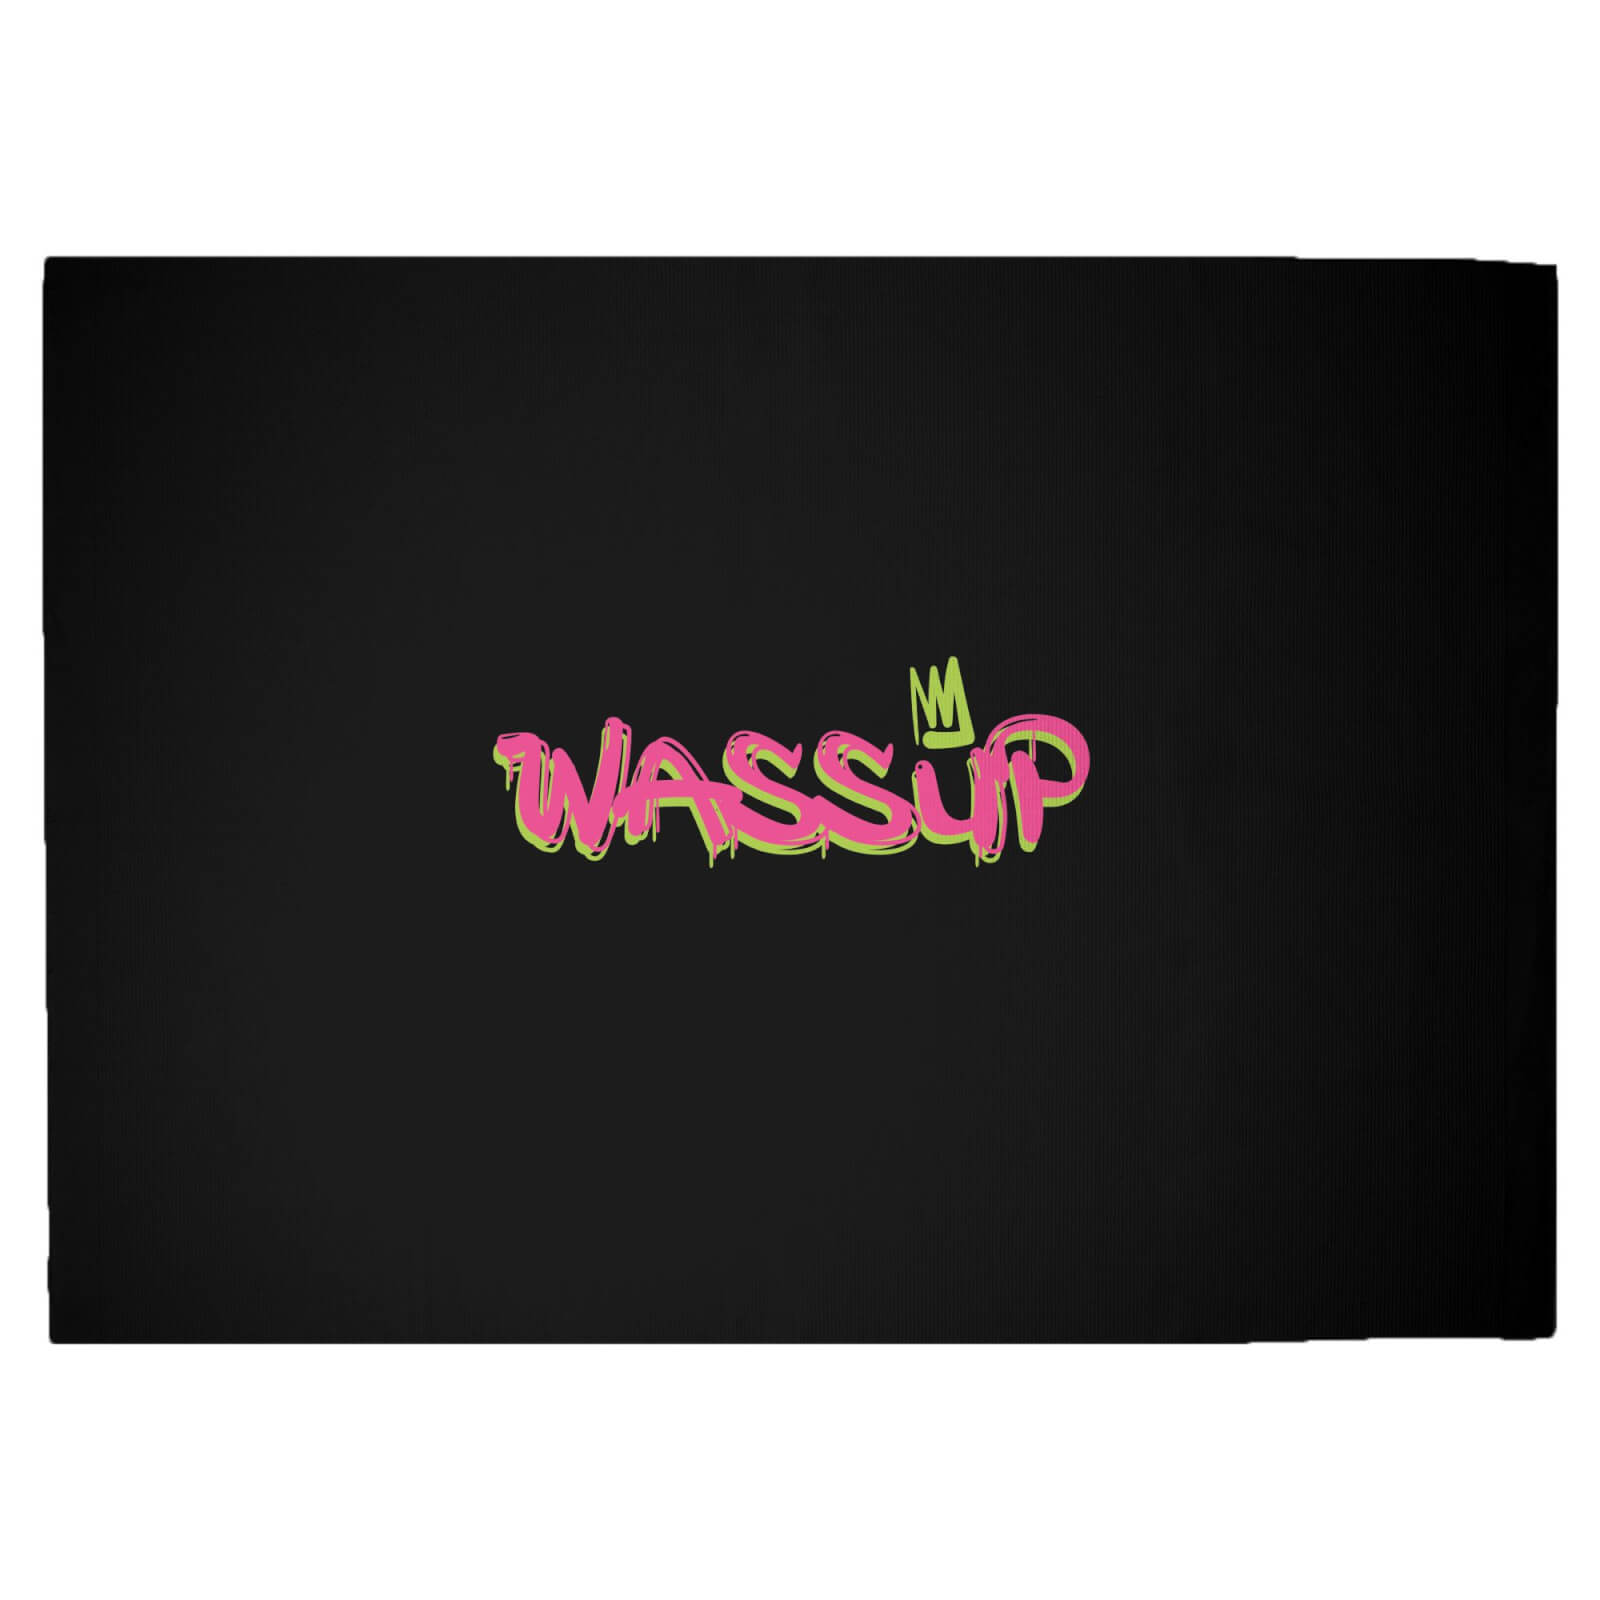 'Wassup' Graphic Woven Rug - Large